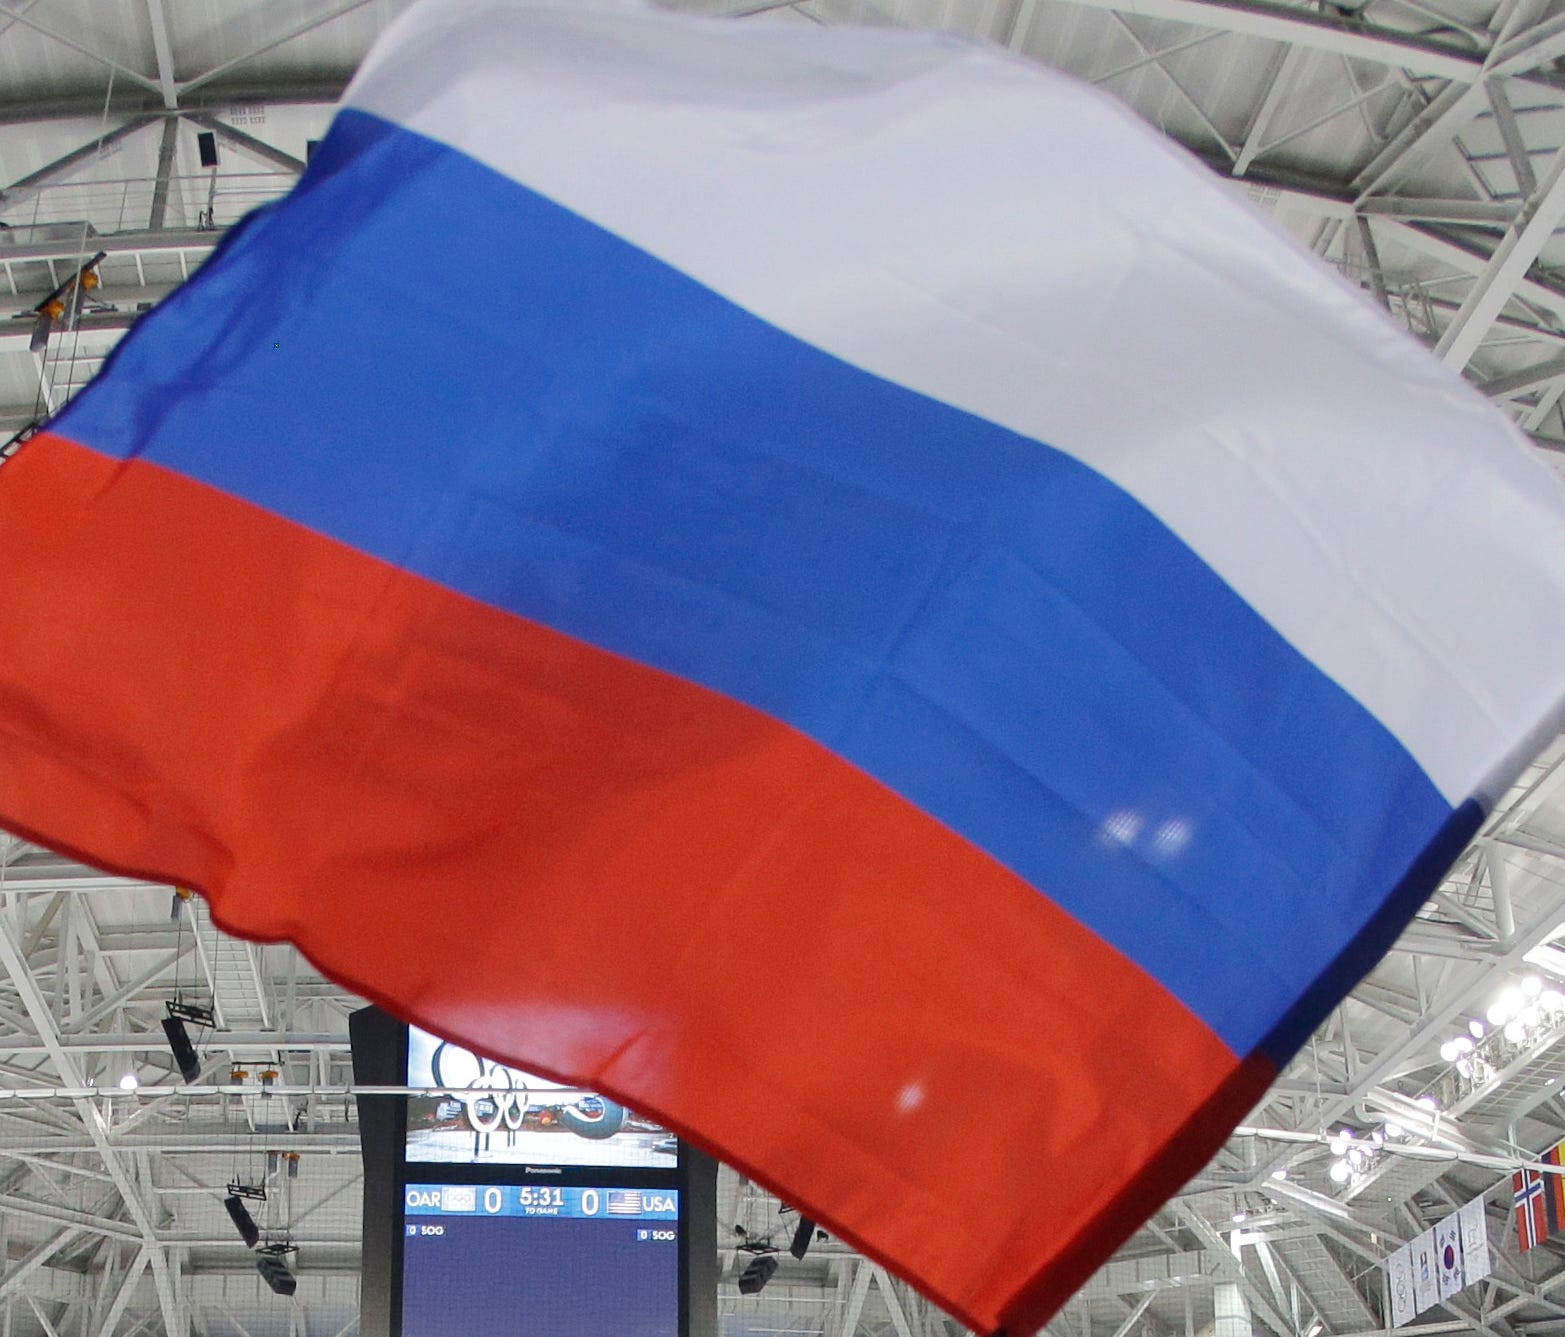 A Russian flag that was being waved at their men's hockey game against the United States.